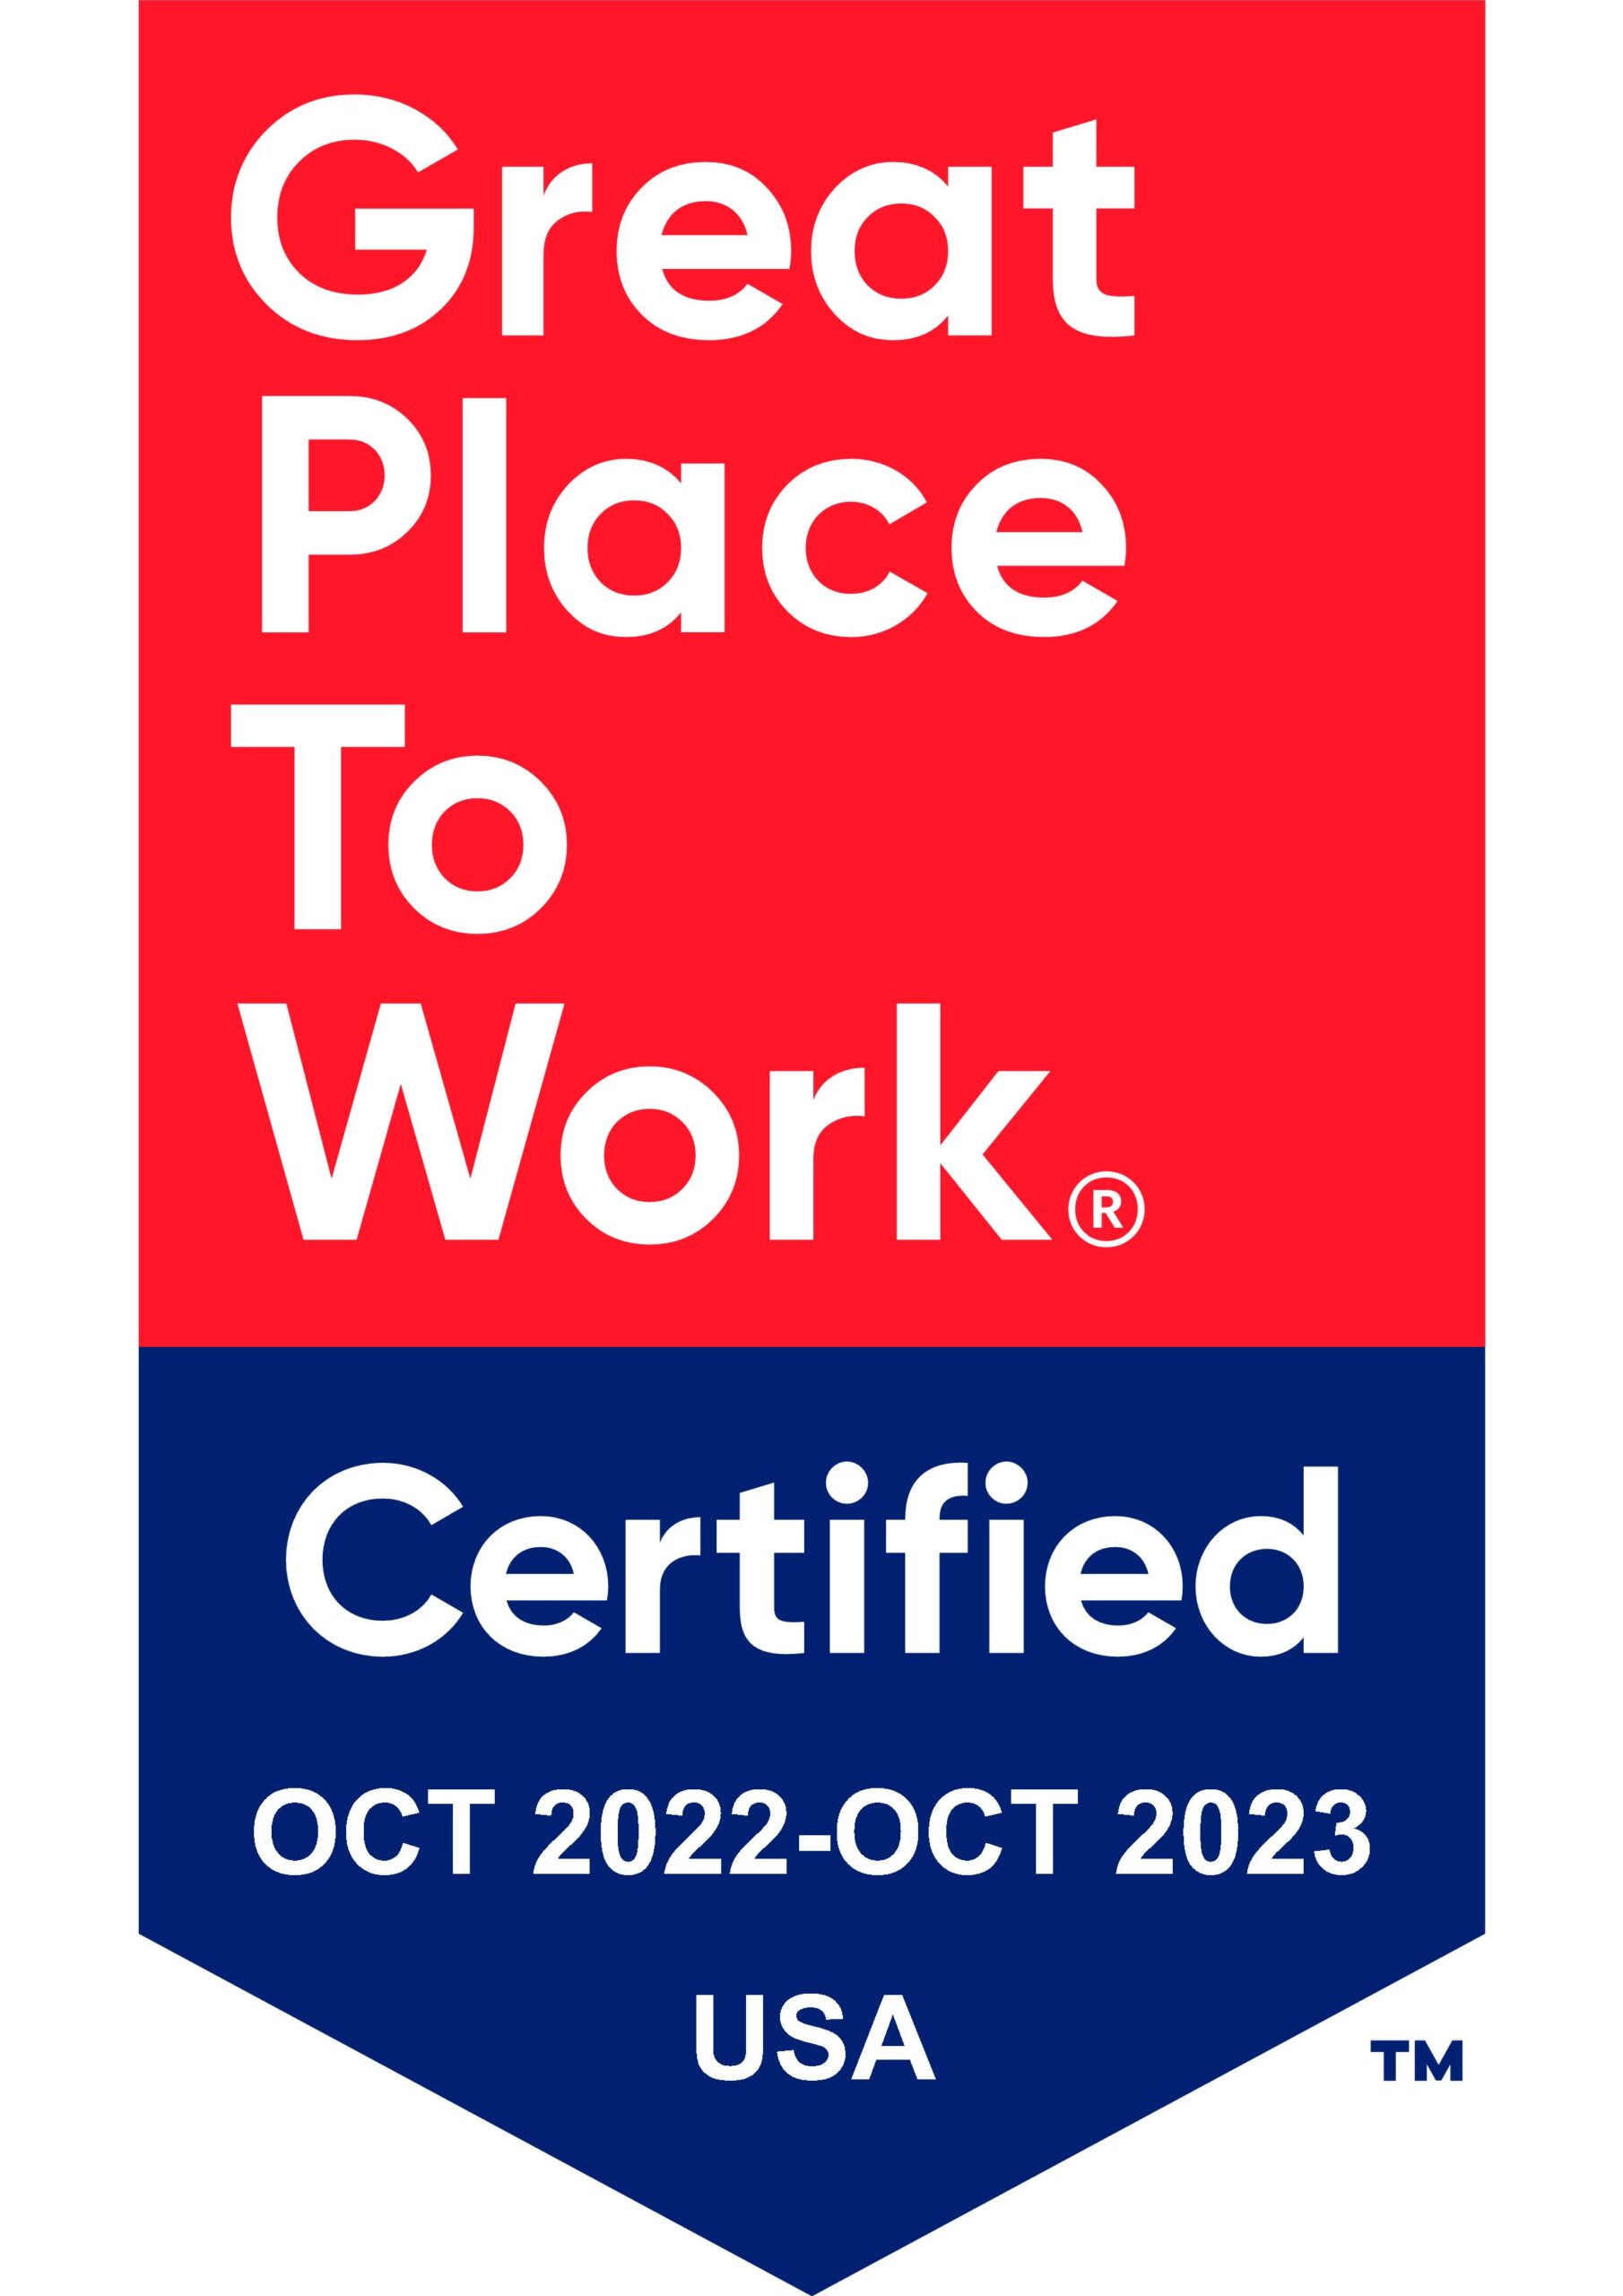 Great Place to Work Eichleay,_Inc._Oct 2022- Oct 2023_Certification_Badge